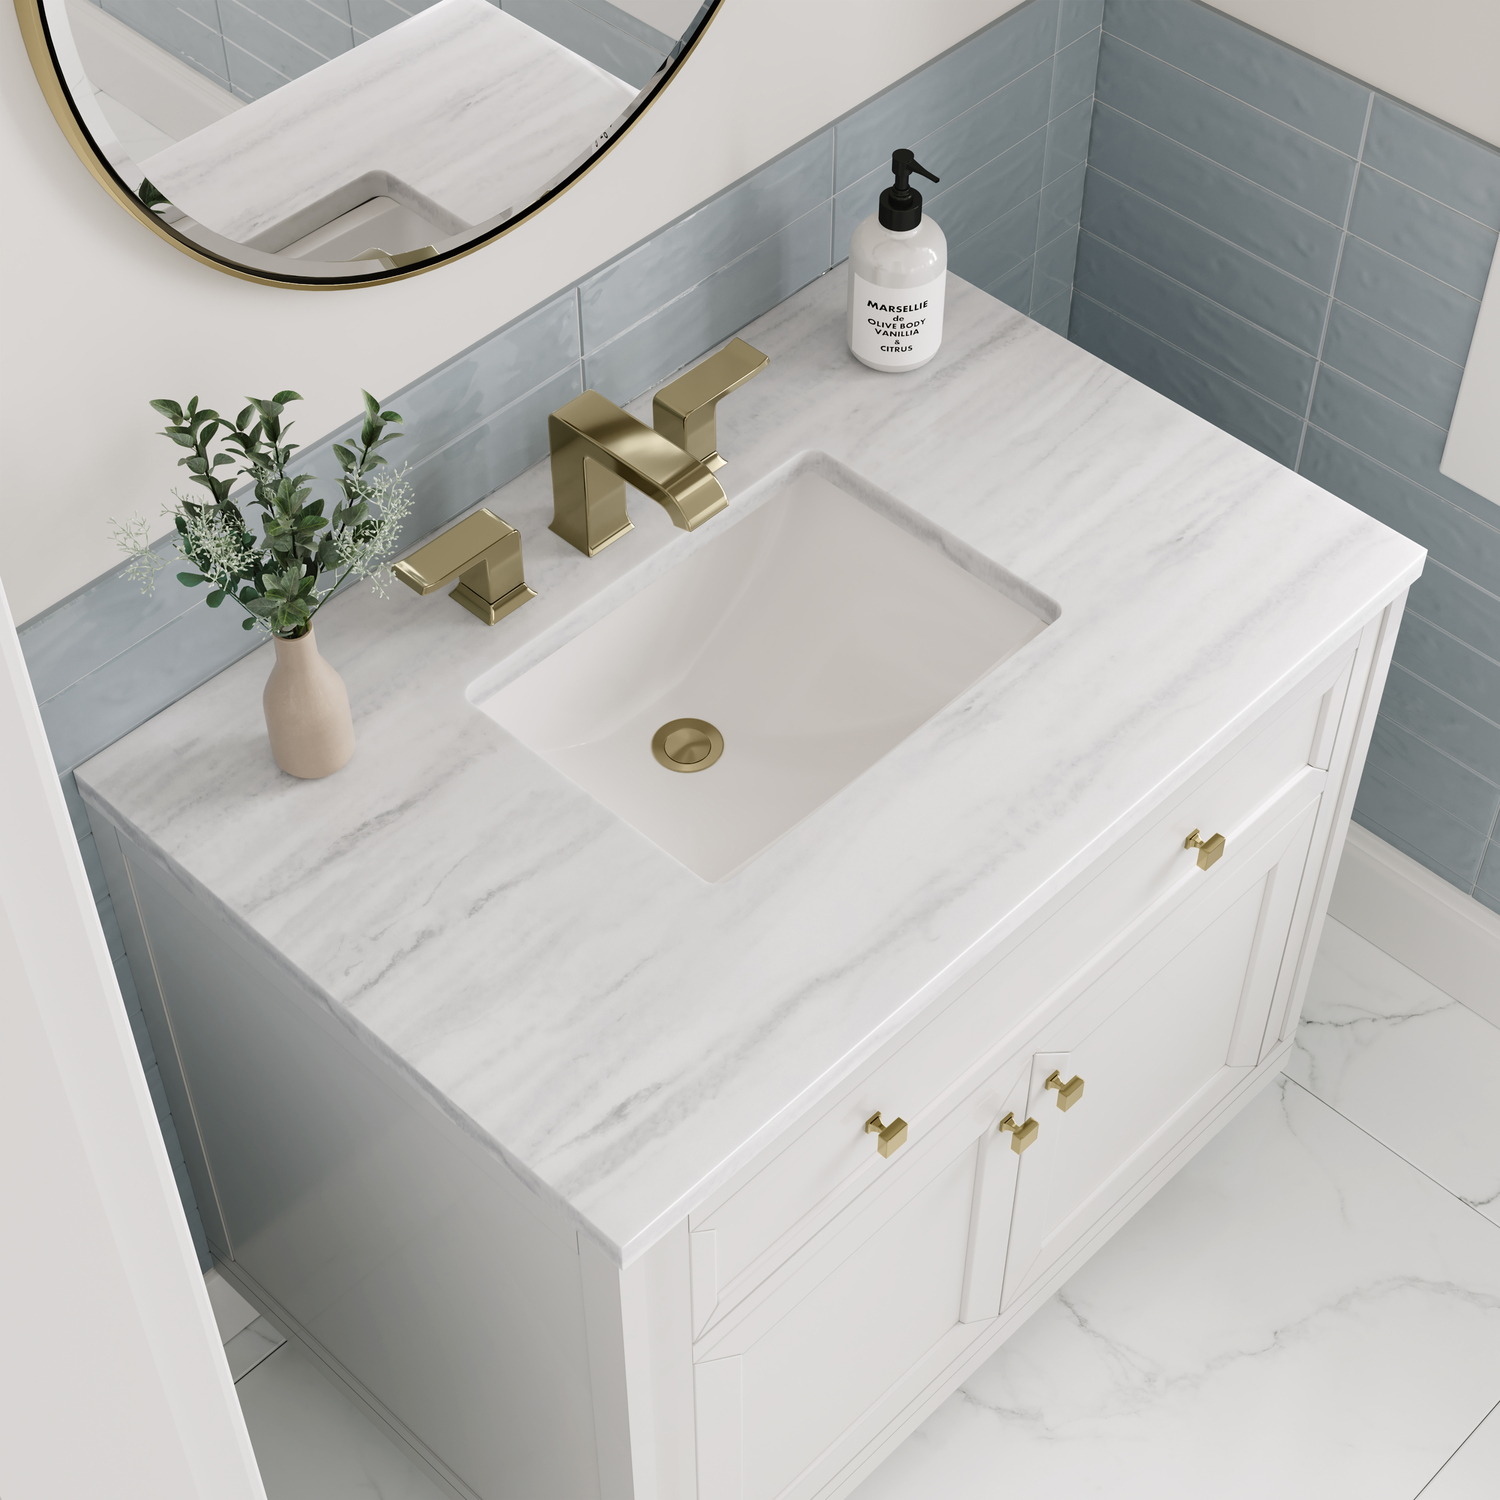 bathroom cabinet collections James Martin Vanity Glossy White Modern Farmhouse, Transitional